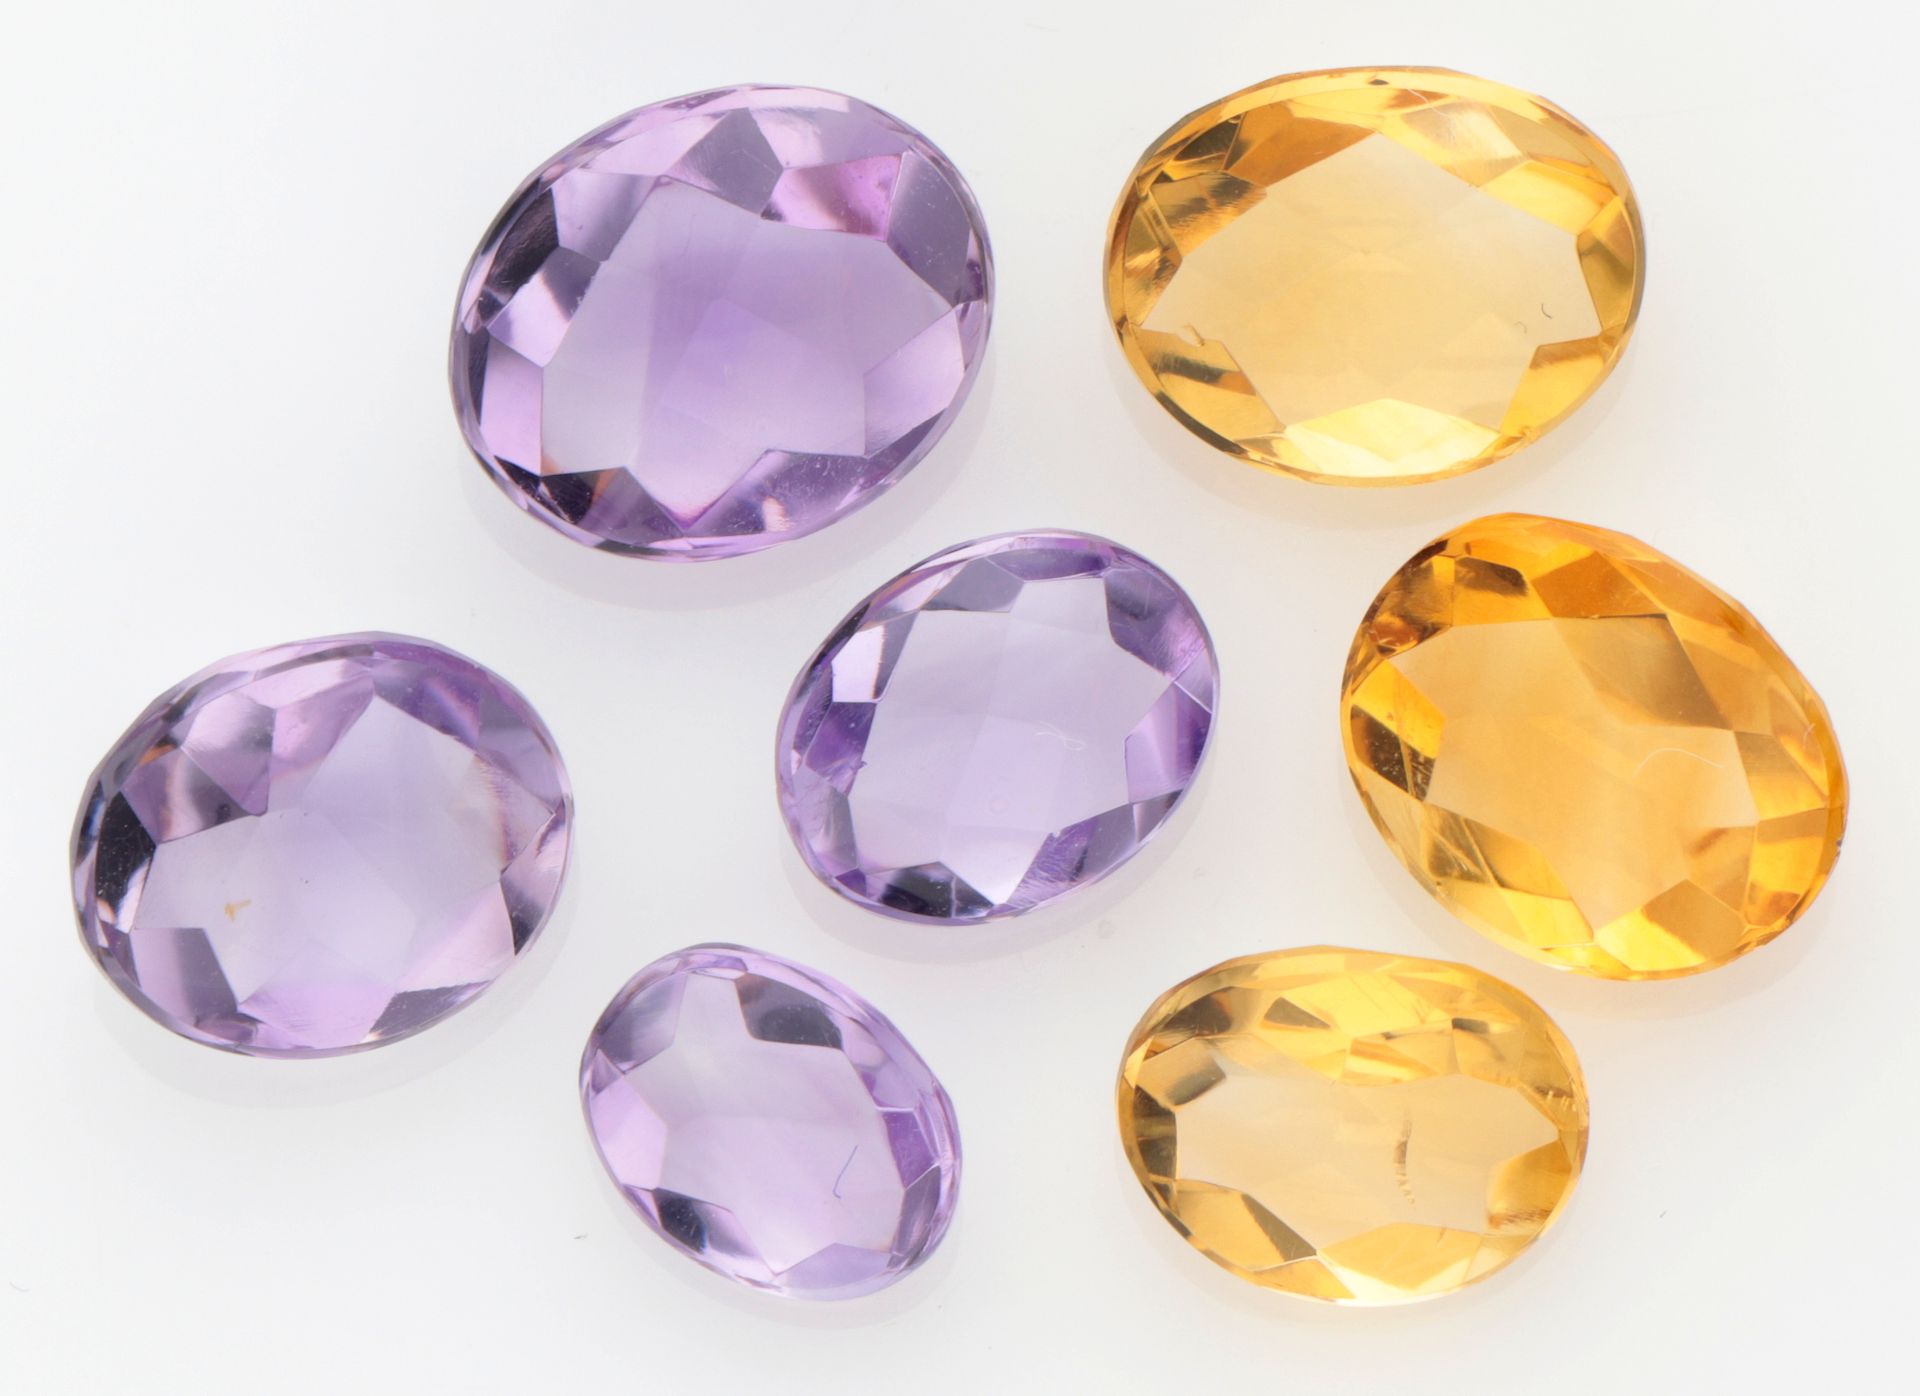 Lot of 7 mixed cut natural amethysts and citrines. Varias dimensiones.